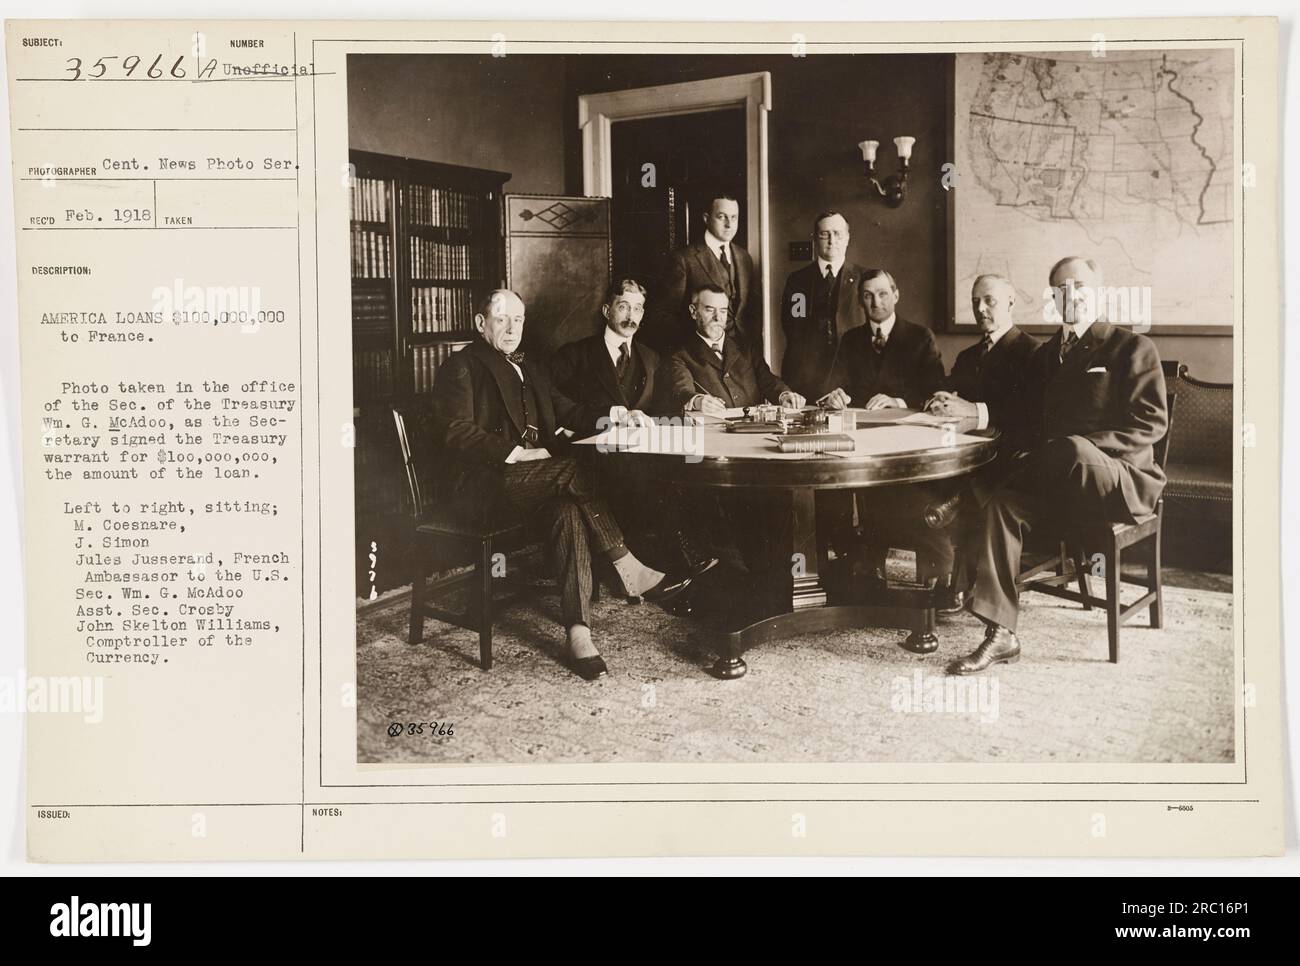 Caption: 'Photograph taken in February 1918, showing the office of the Secretary of the Treasury Wm. G. McAdoo. Secretary McAdoo is seen signing a Treasury warrant for a $100,000,000 loan to France. Also present in the photograph are M. Coesnare, J. Simon 18 SUED Jules Jusserand, French Ambassador to the U.S., Assistant Secretary Crosby, and John Skelton Williams, Comptroller of the Currency.' Stock Photo